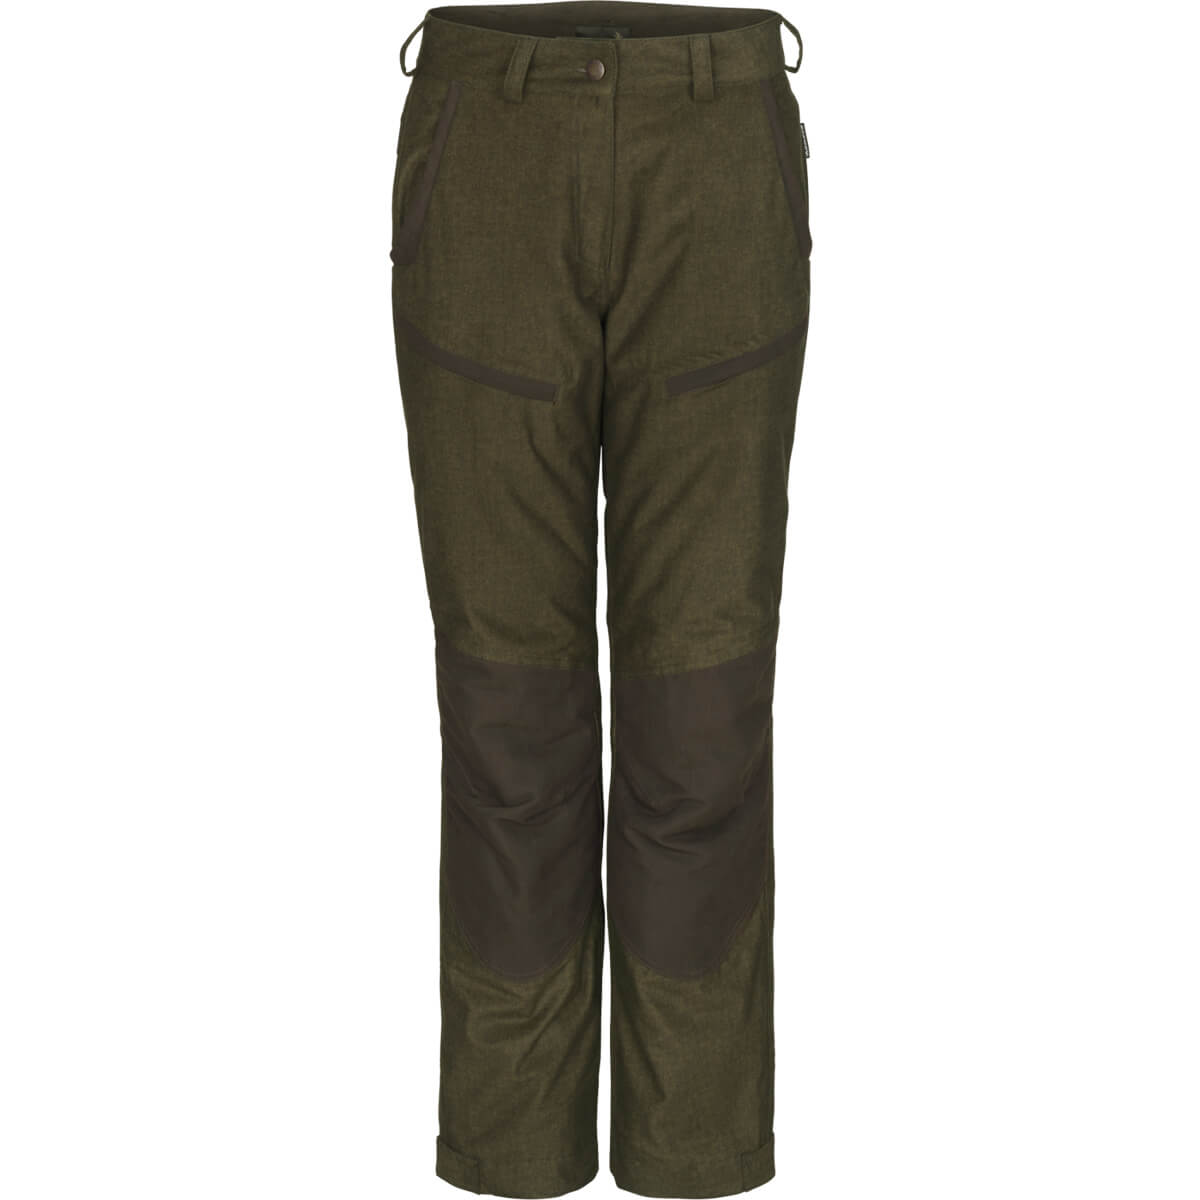 Seeland Trousers Lady North - Winter Hunting Clothing